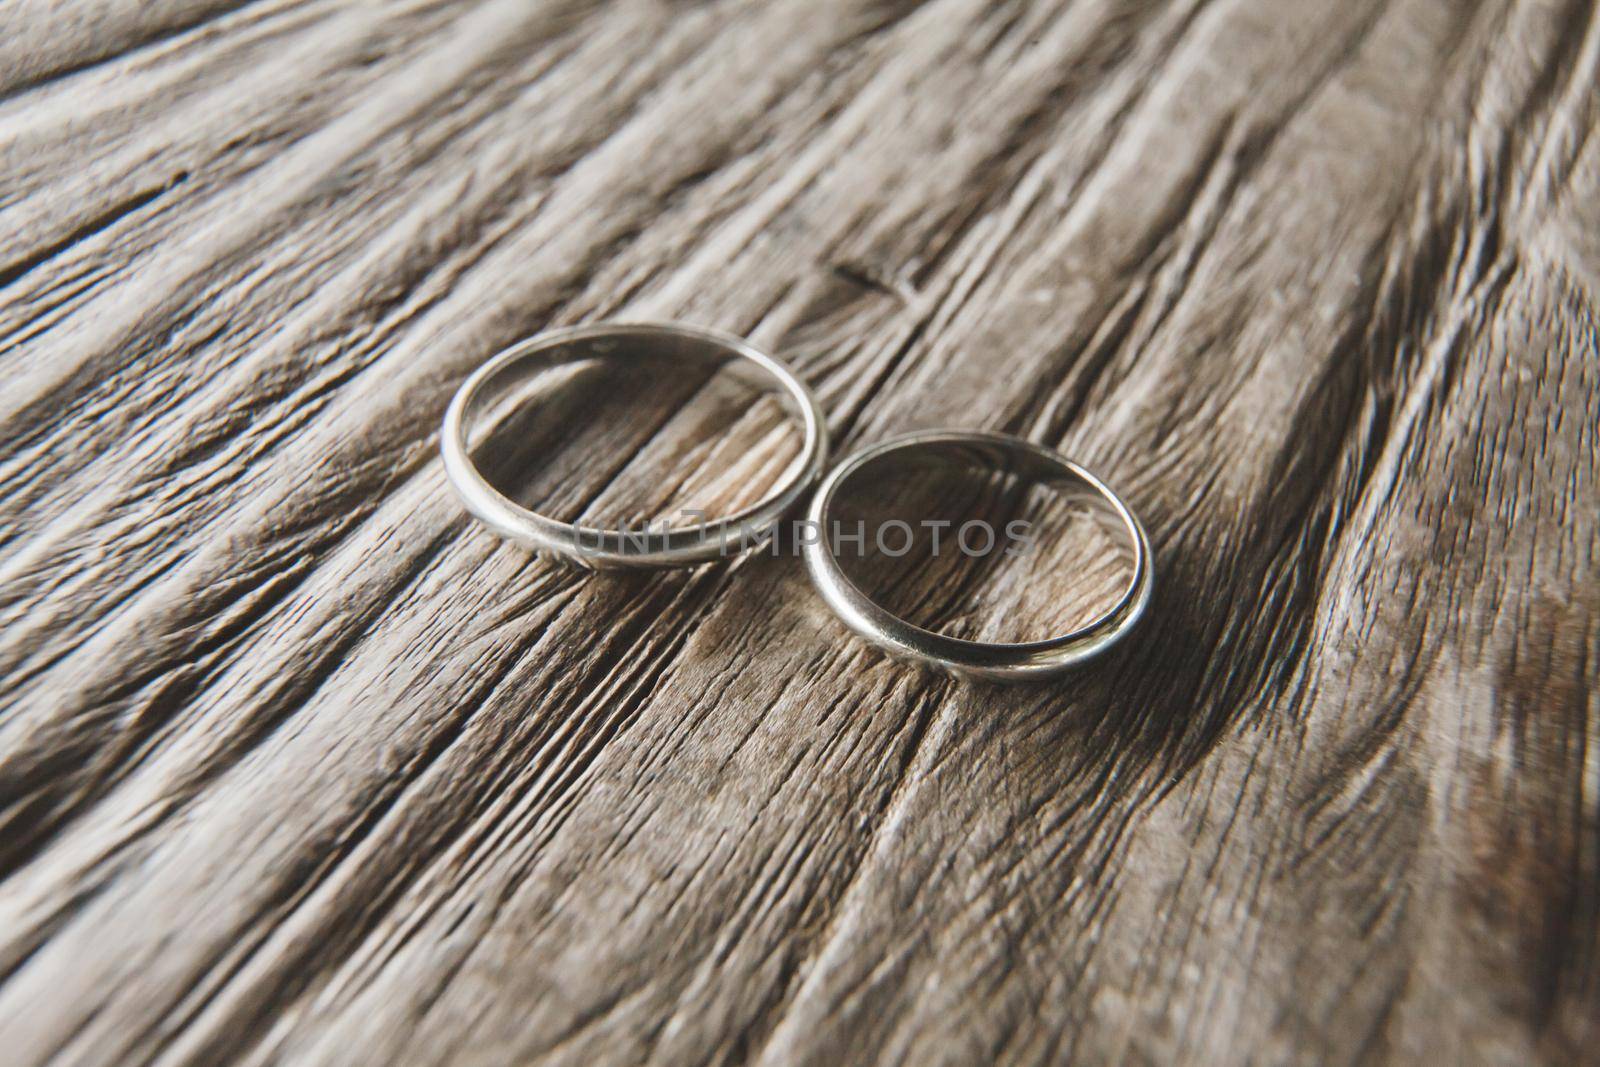 Macro shooting of gold wedding rings on the texture of wood by StudioPeace